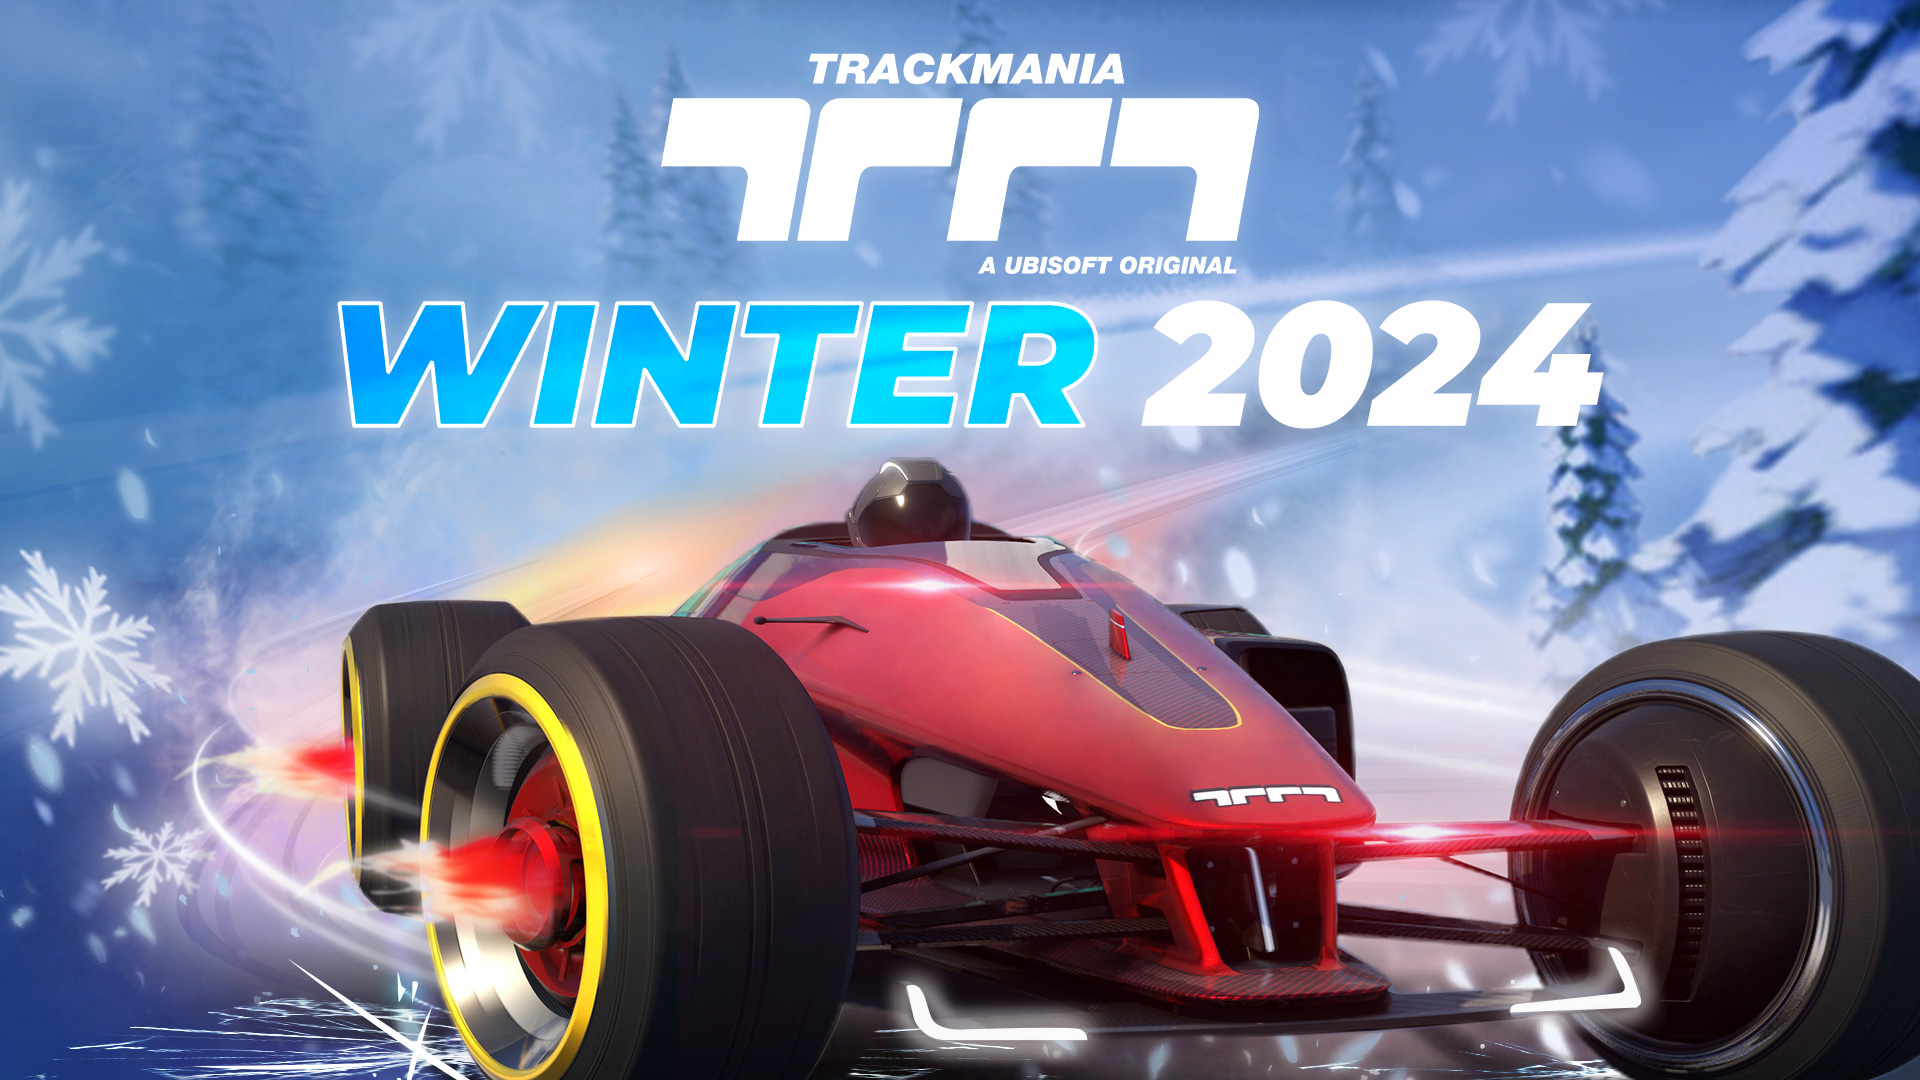 WINTER 2024 CAMPAIGN IS OUT TOMORROW!